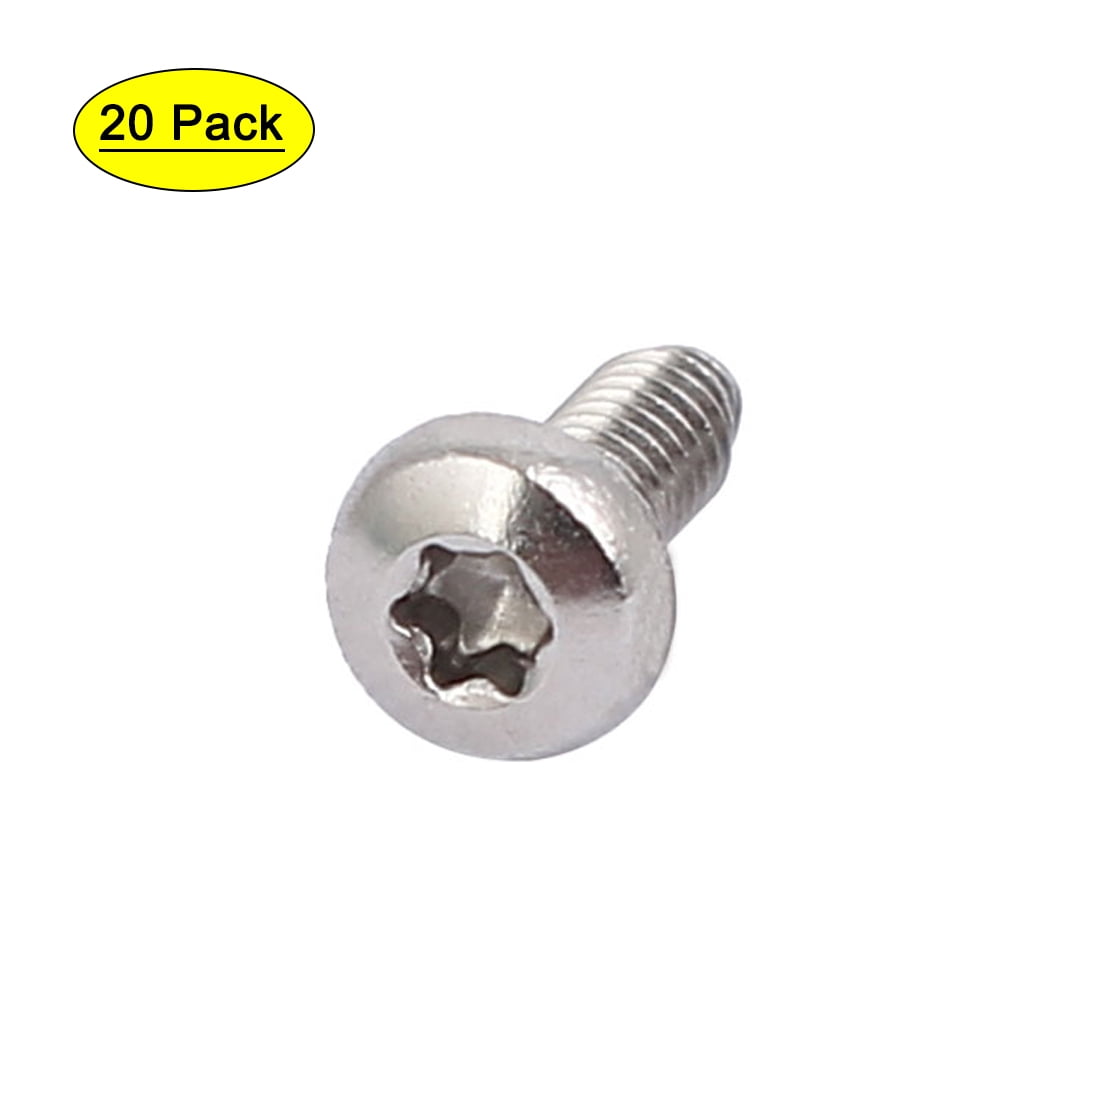 1080PC Assorted Metric Stainless Steel Hex Head Set Screw Bolts Nuts Refill Pack 